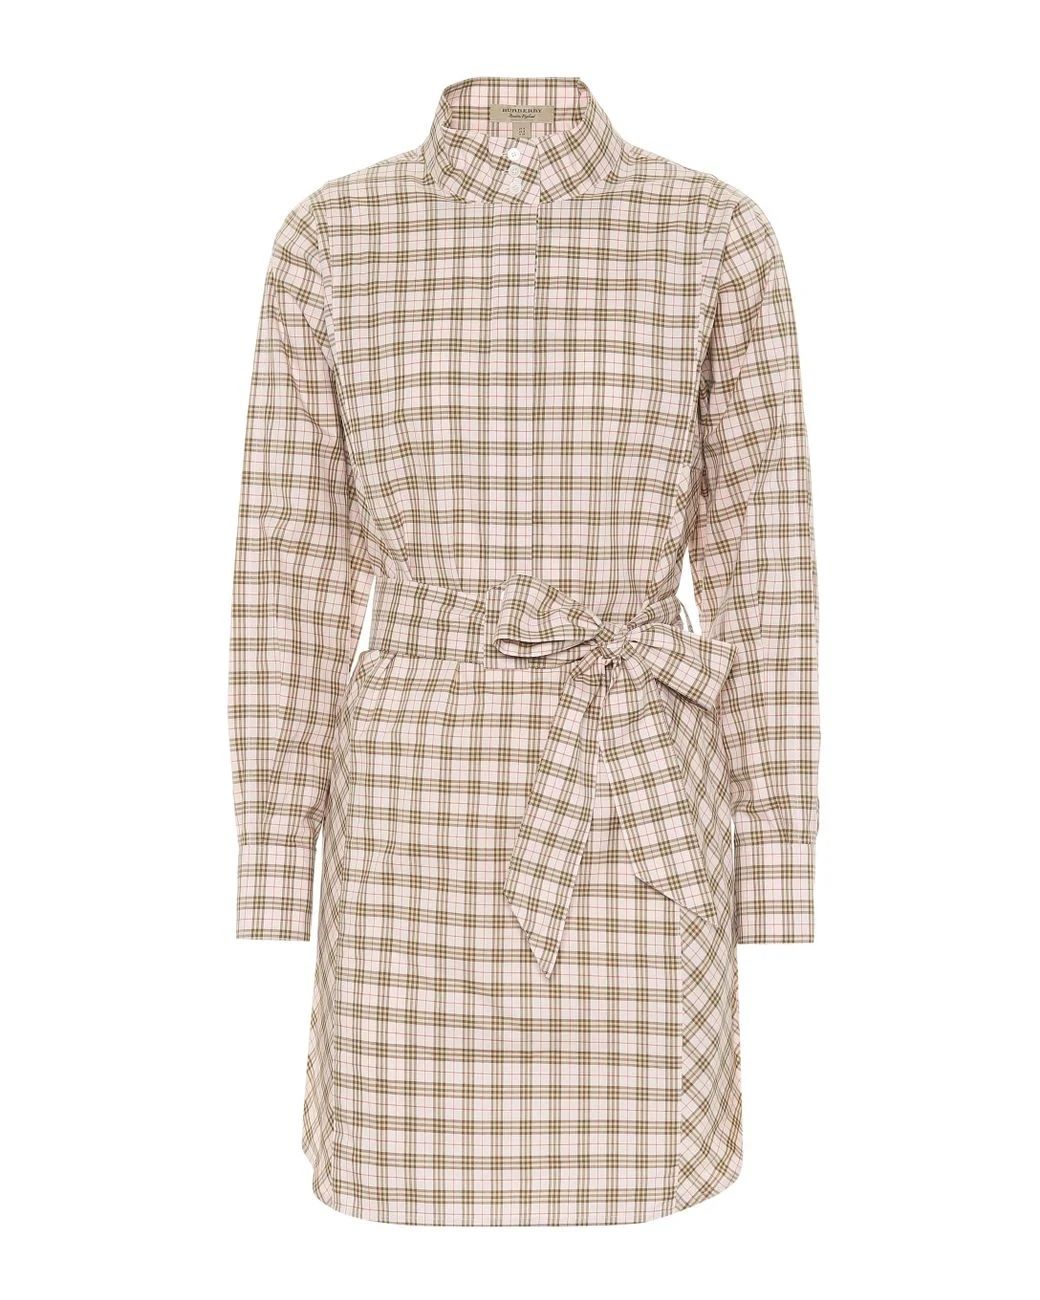 Burberry Iconic Check Cotton Shirt Dress in Pink